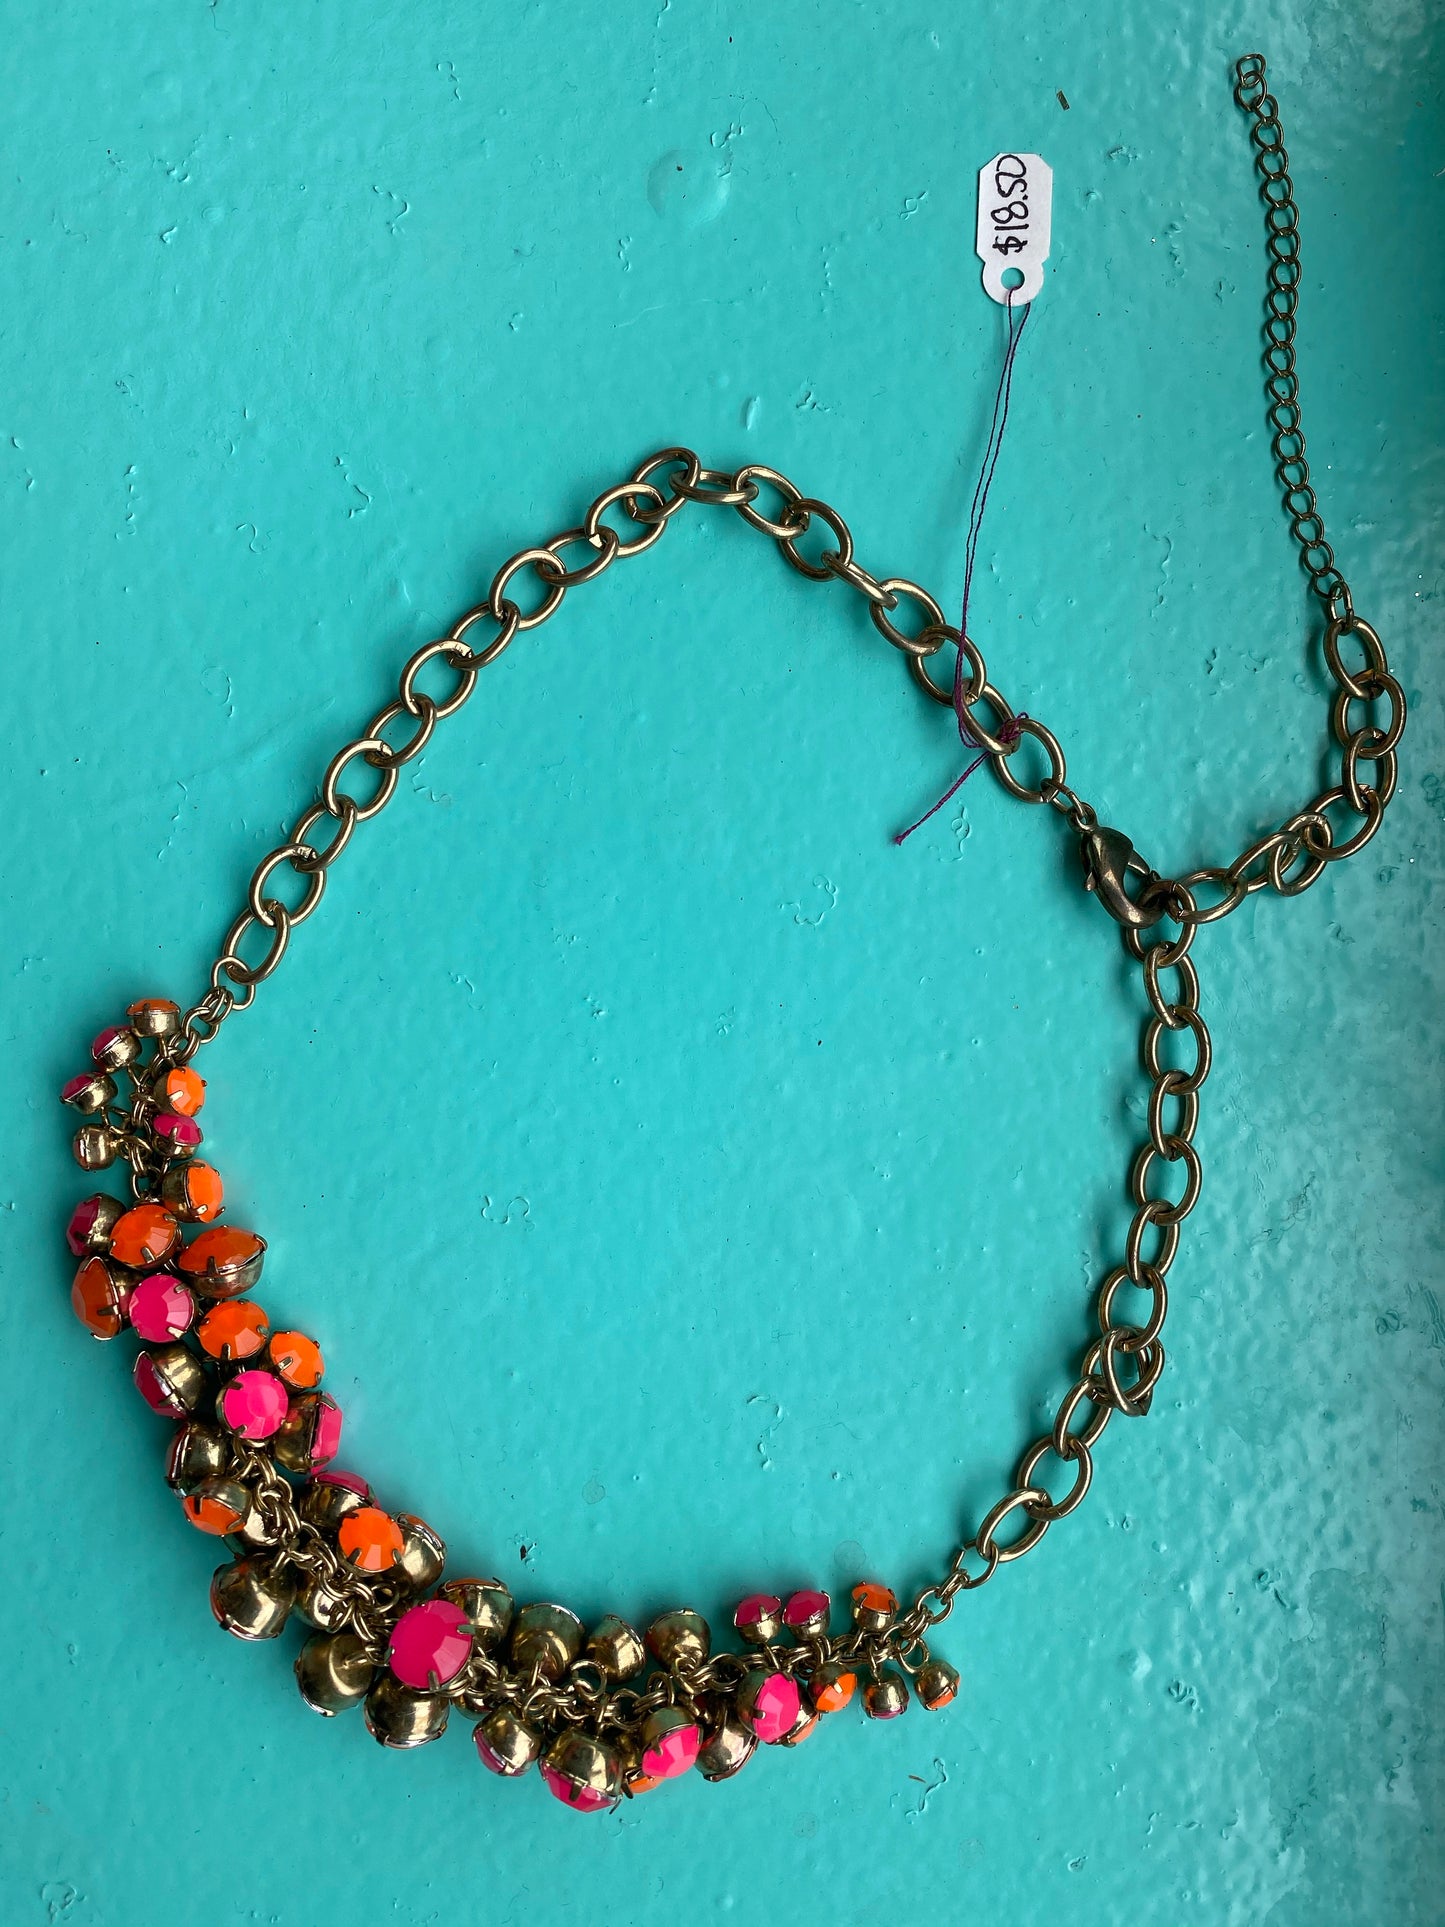 Pink and orange vintage style necklace